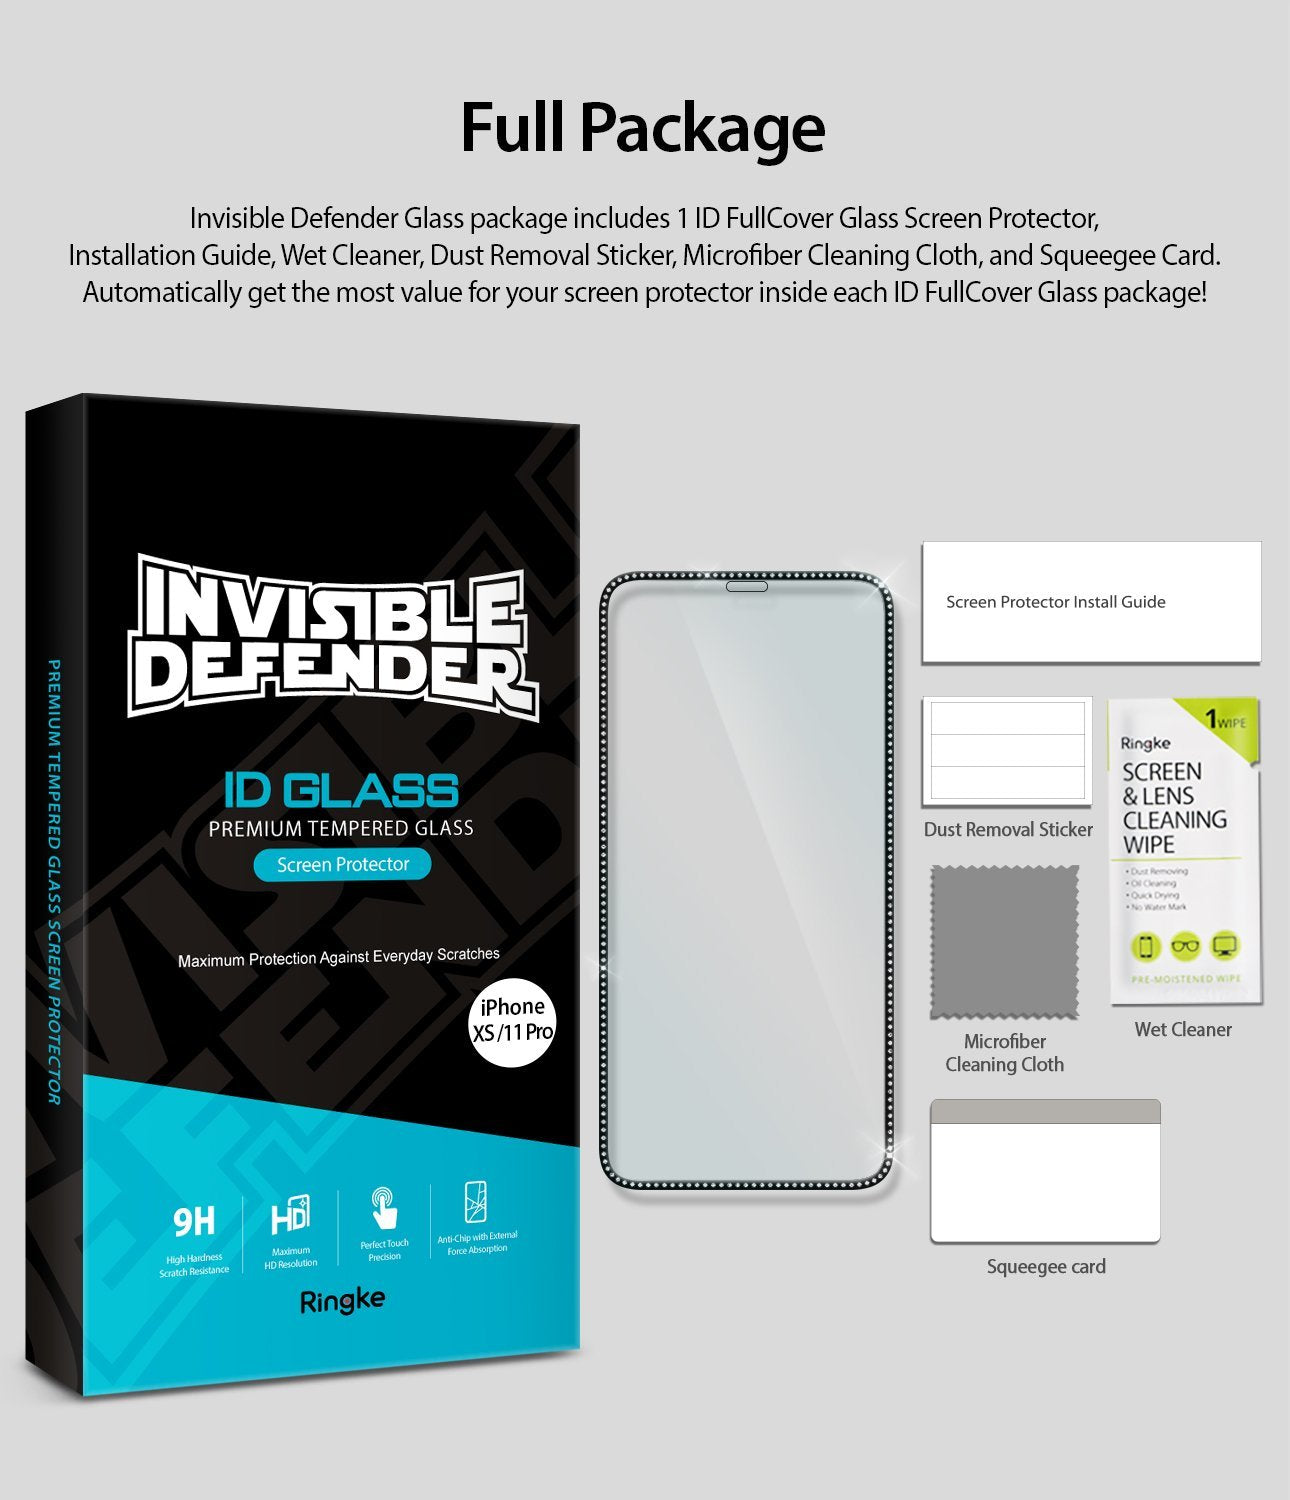 ringke invisible defender for iphone xs 11 pro tempered glass screen protector jewel edition full package